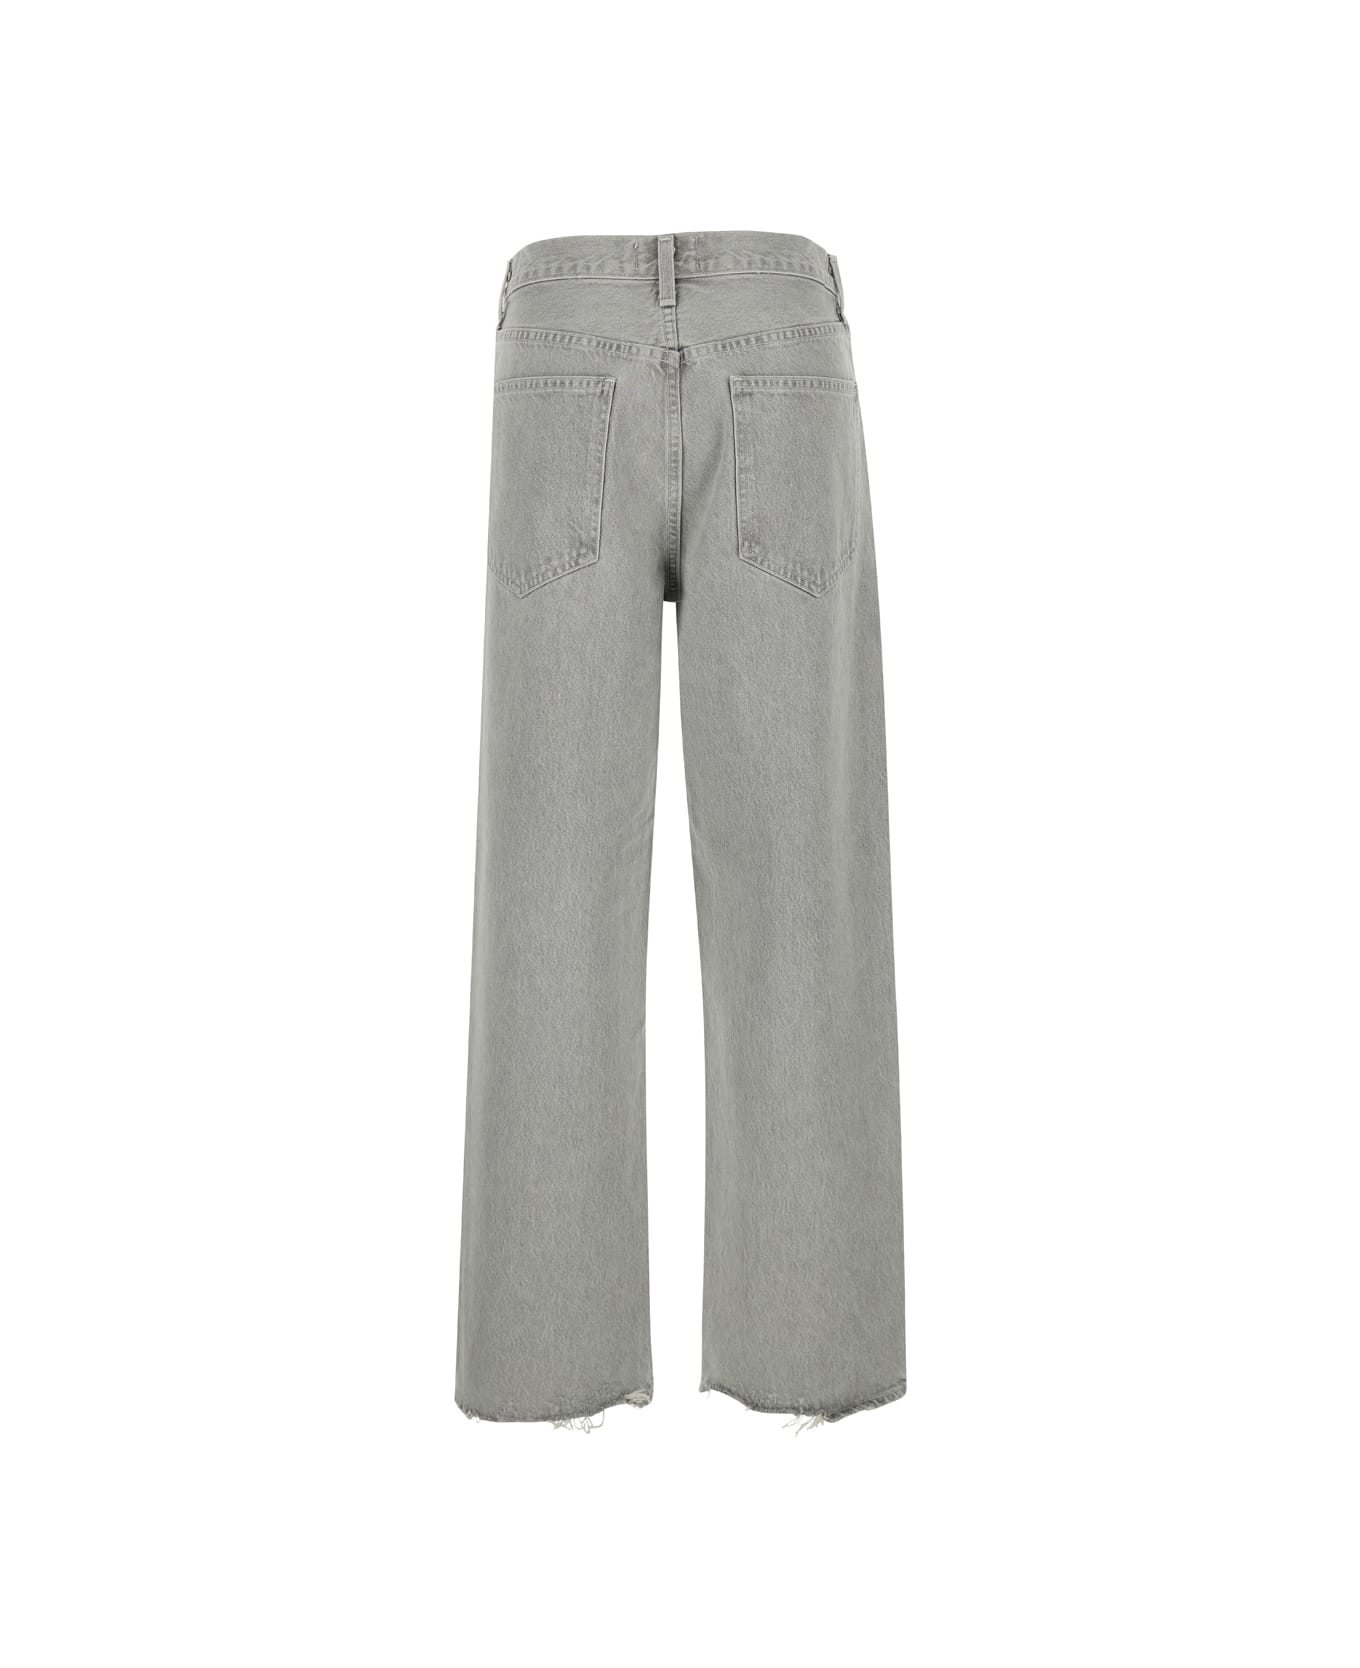 AGOLDE Grey Jeans With Criss Cros Detail In Denim Woman - Grey デニム